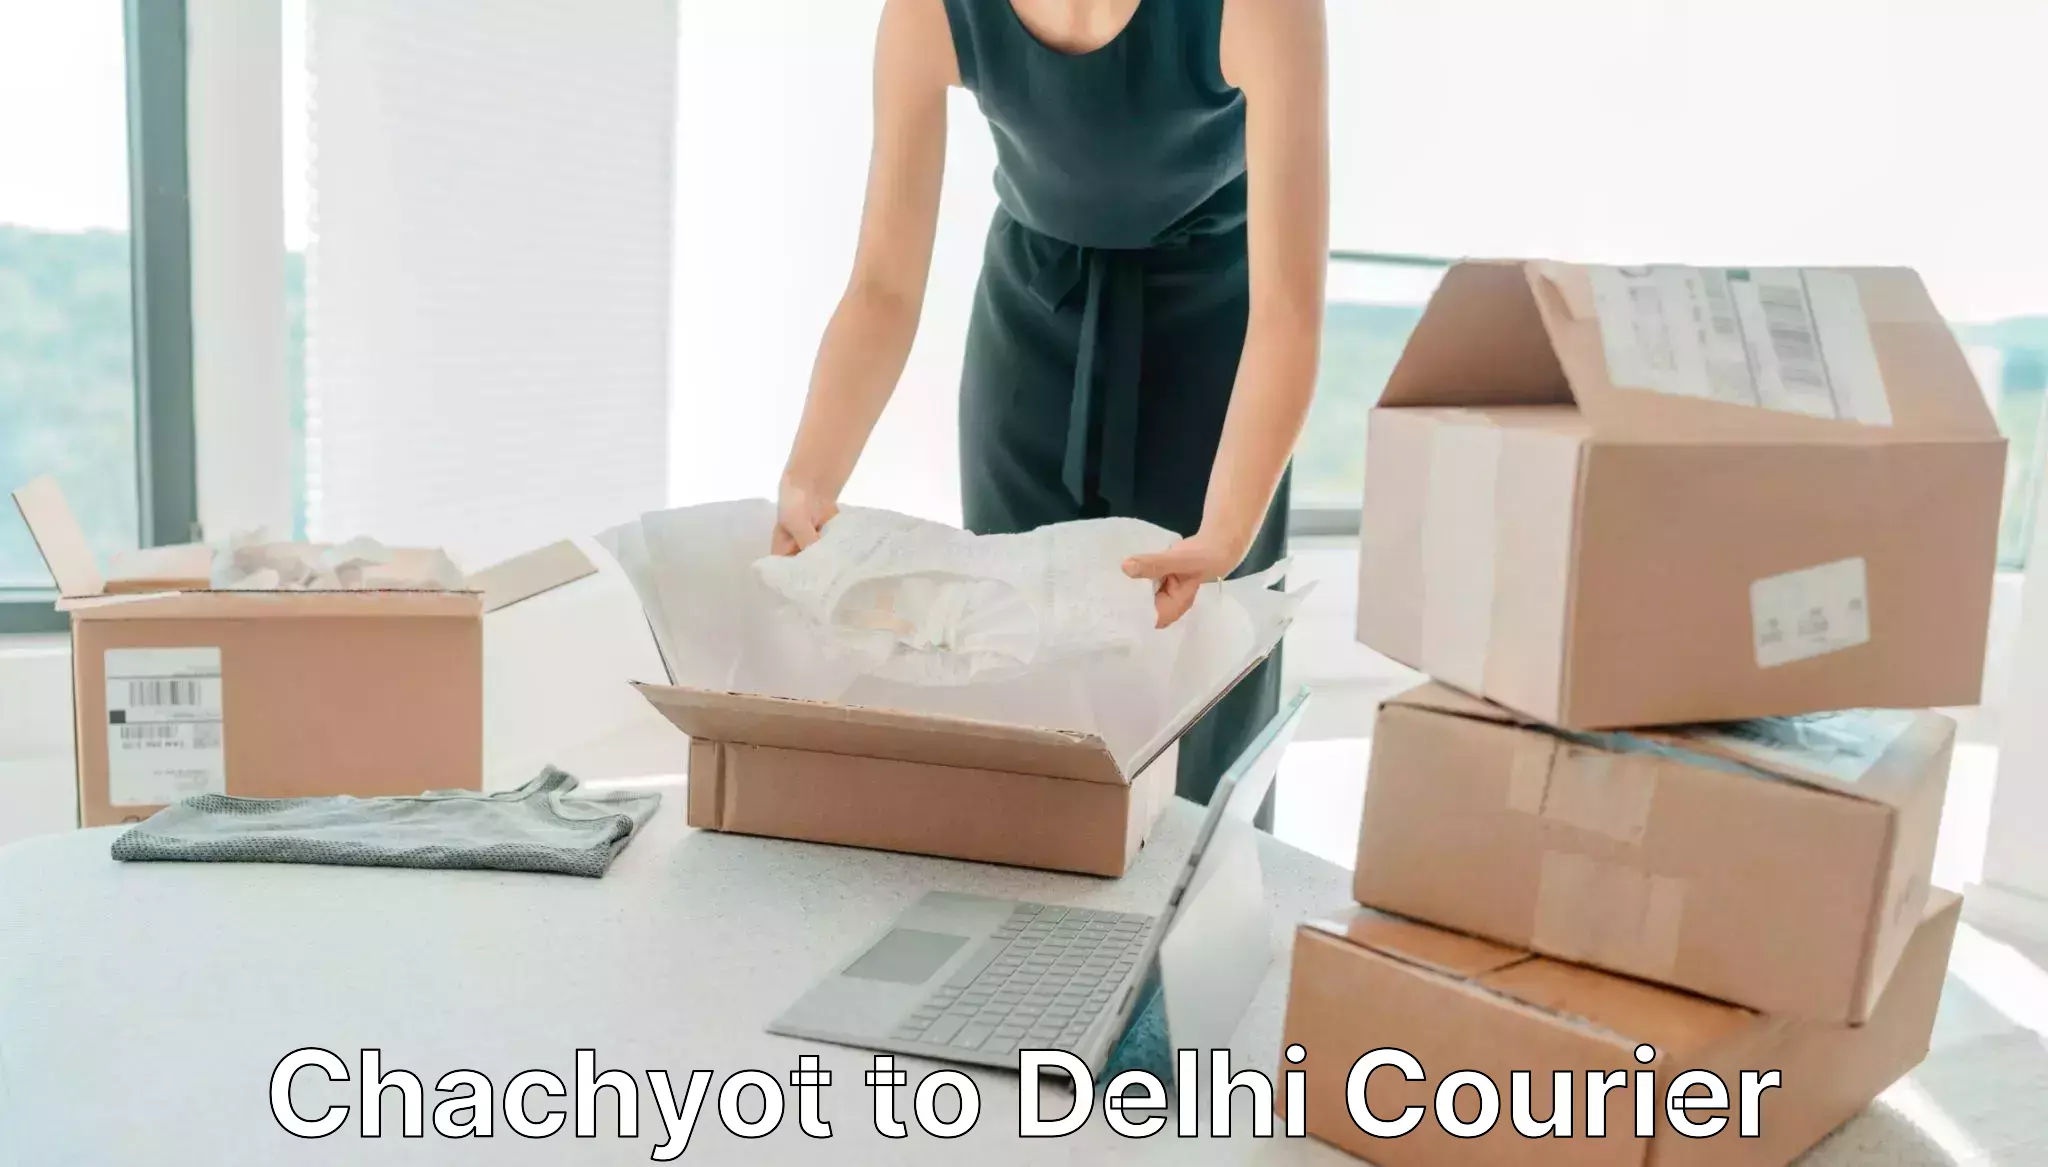 Express package handling Chachyot to University of Delhi